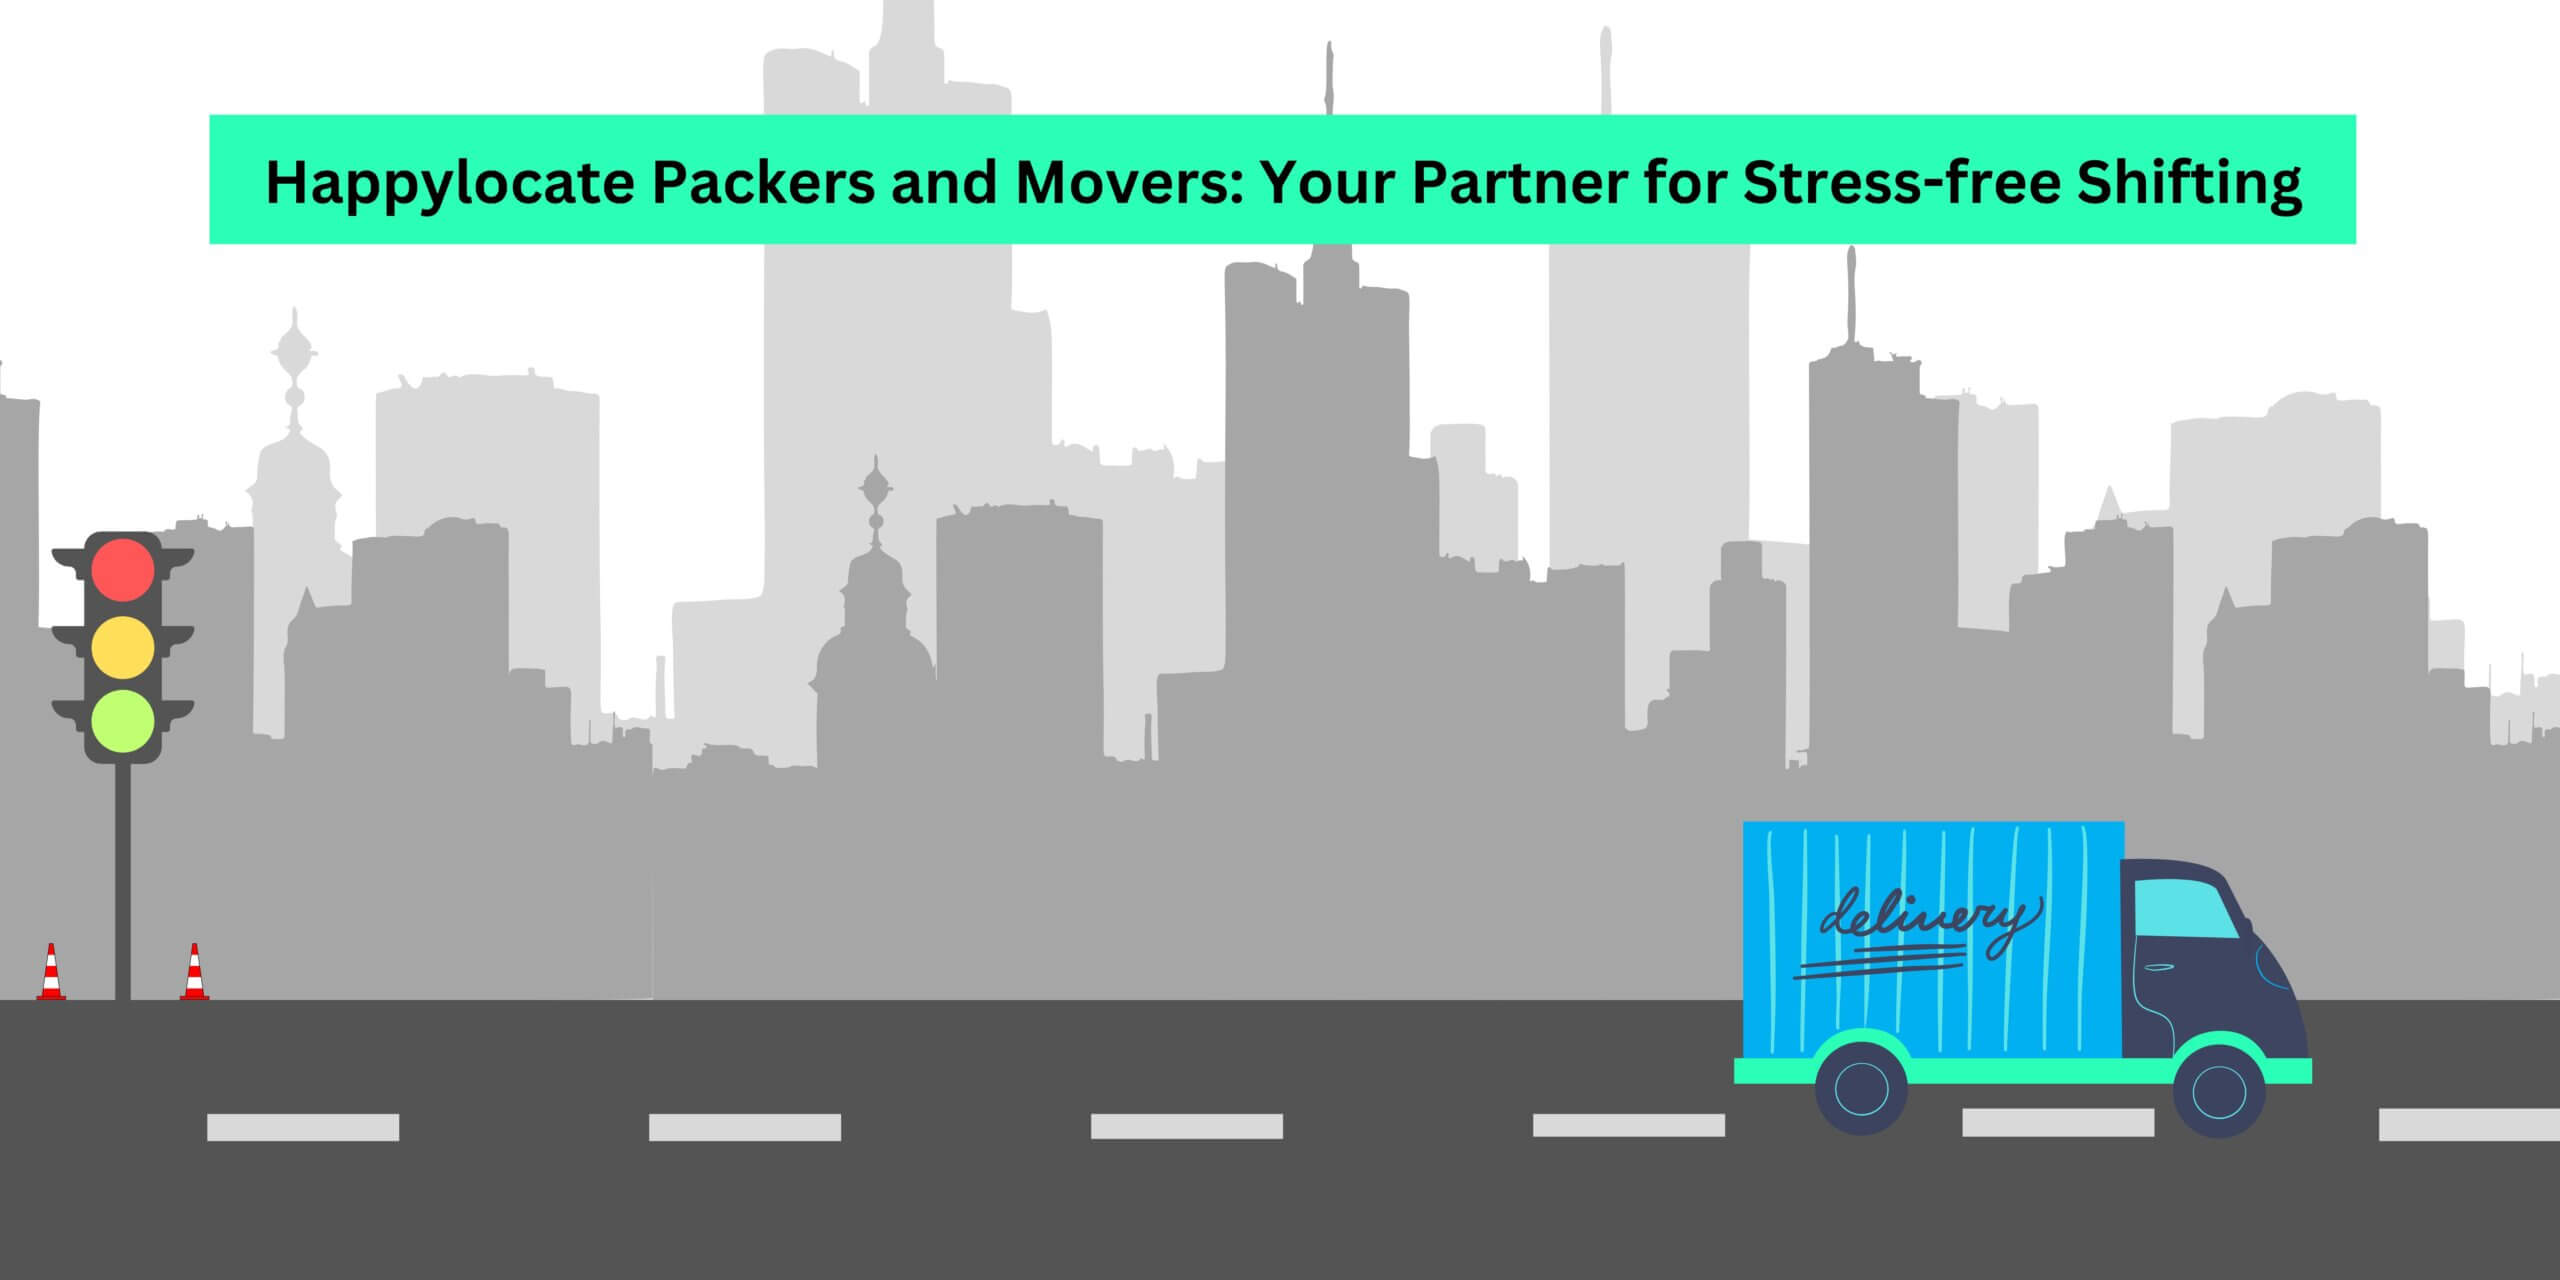 Happylocate Packers & Movers- Your Partner For Stress Free Relocation